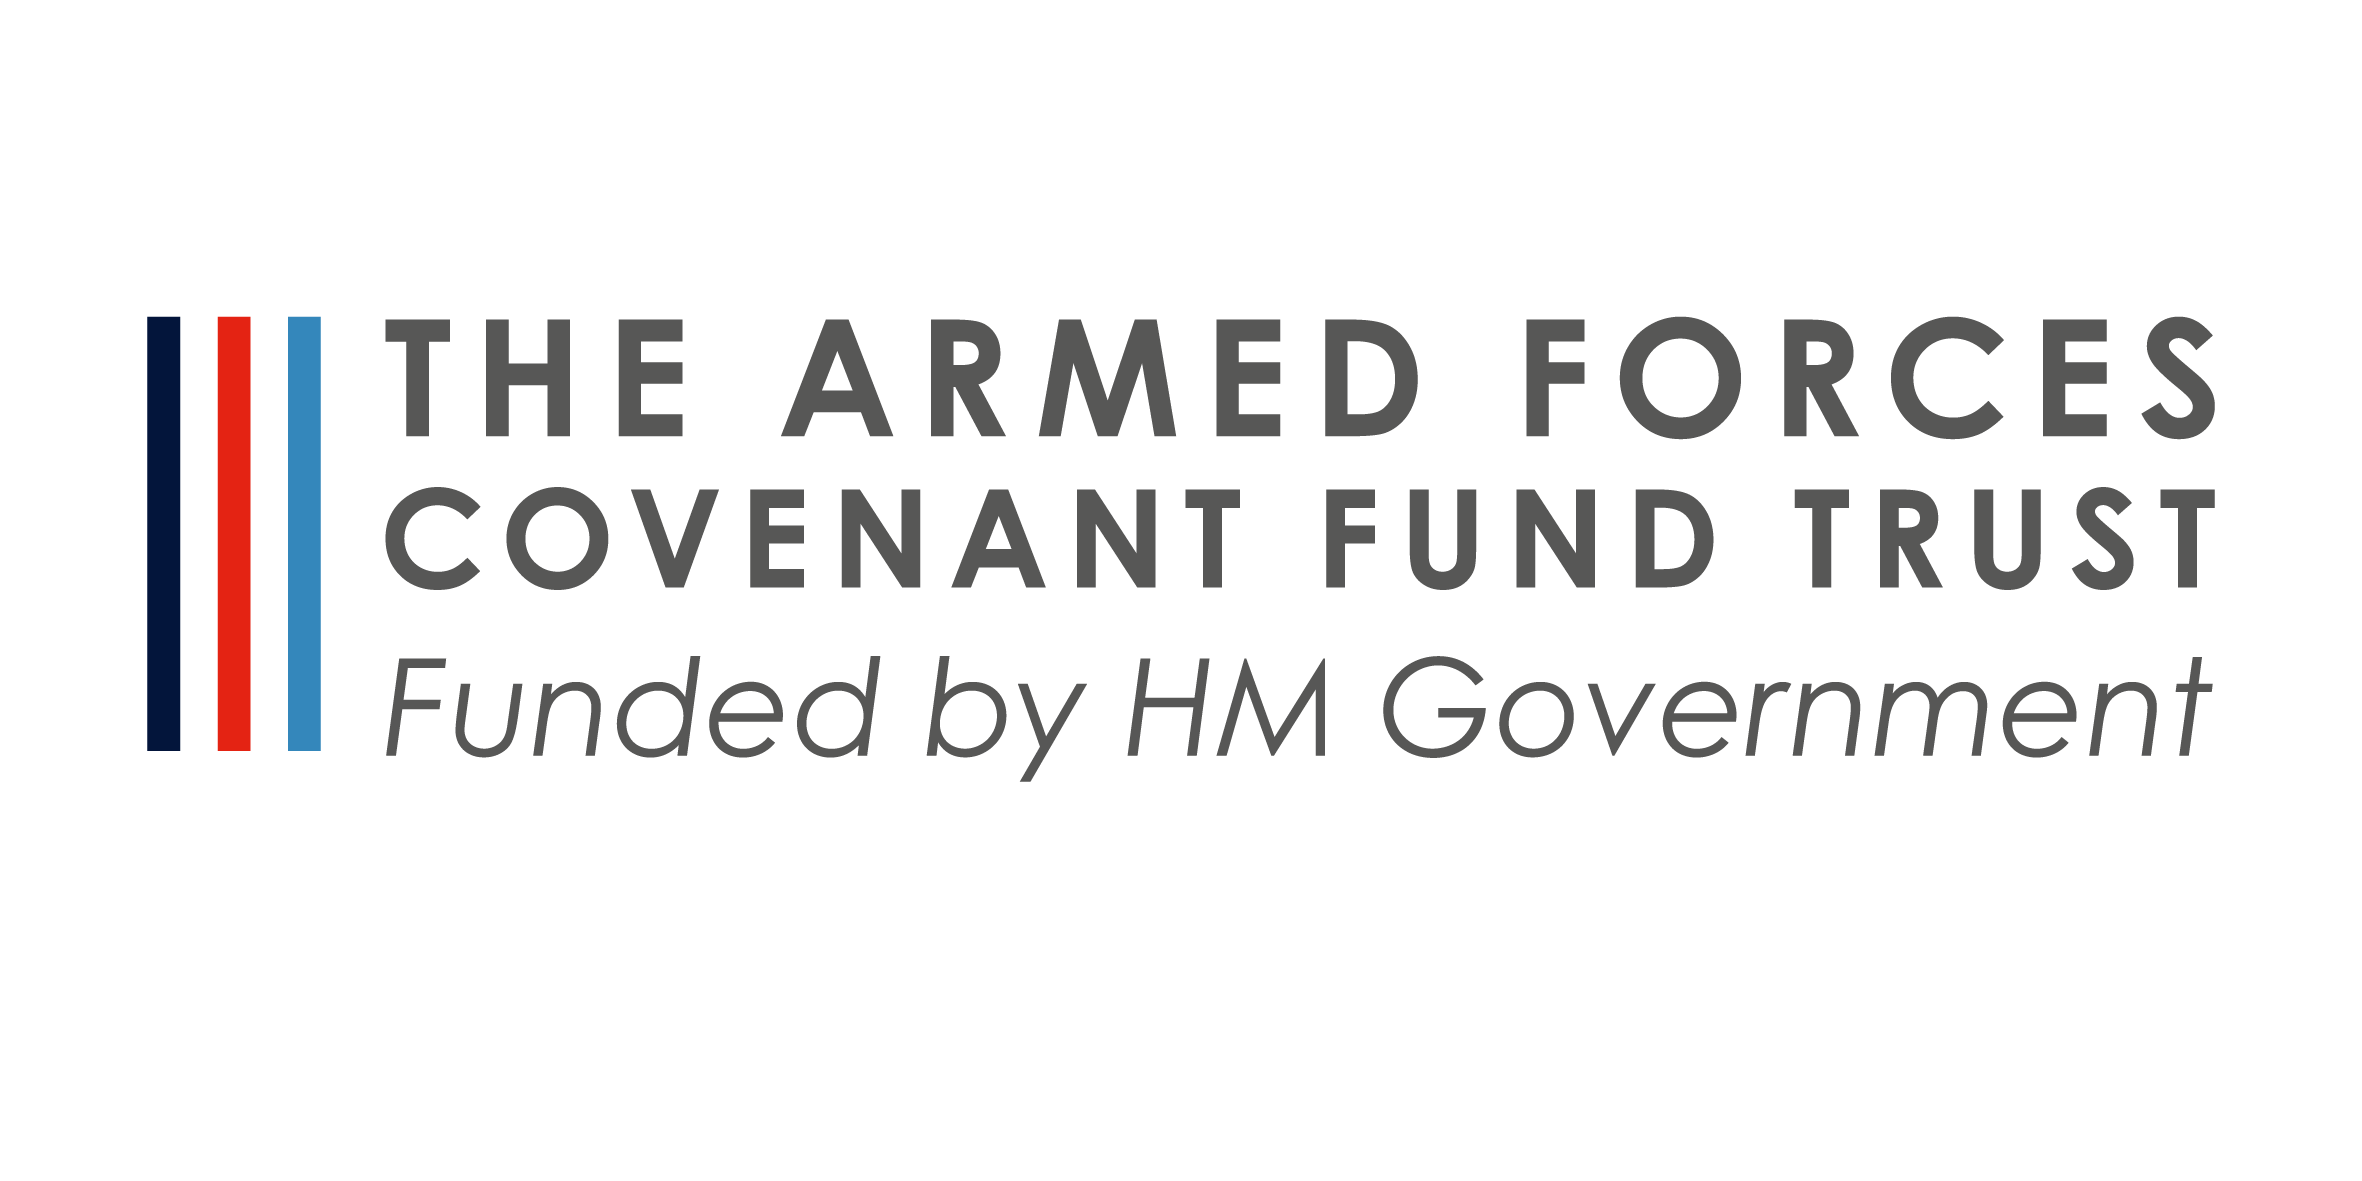 The armed forces covenant fund trust